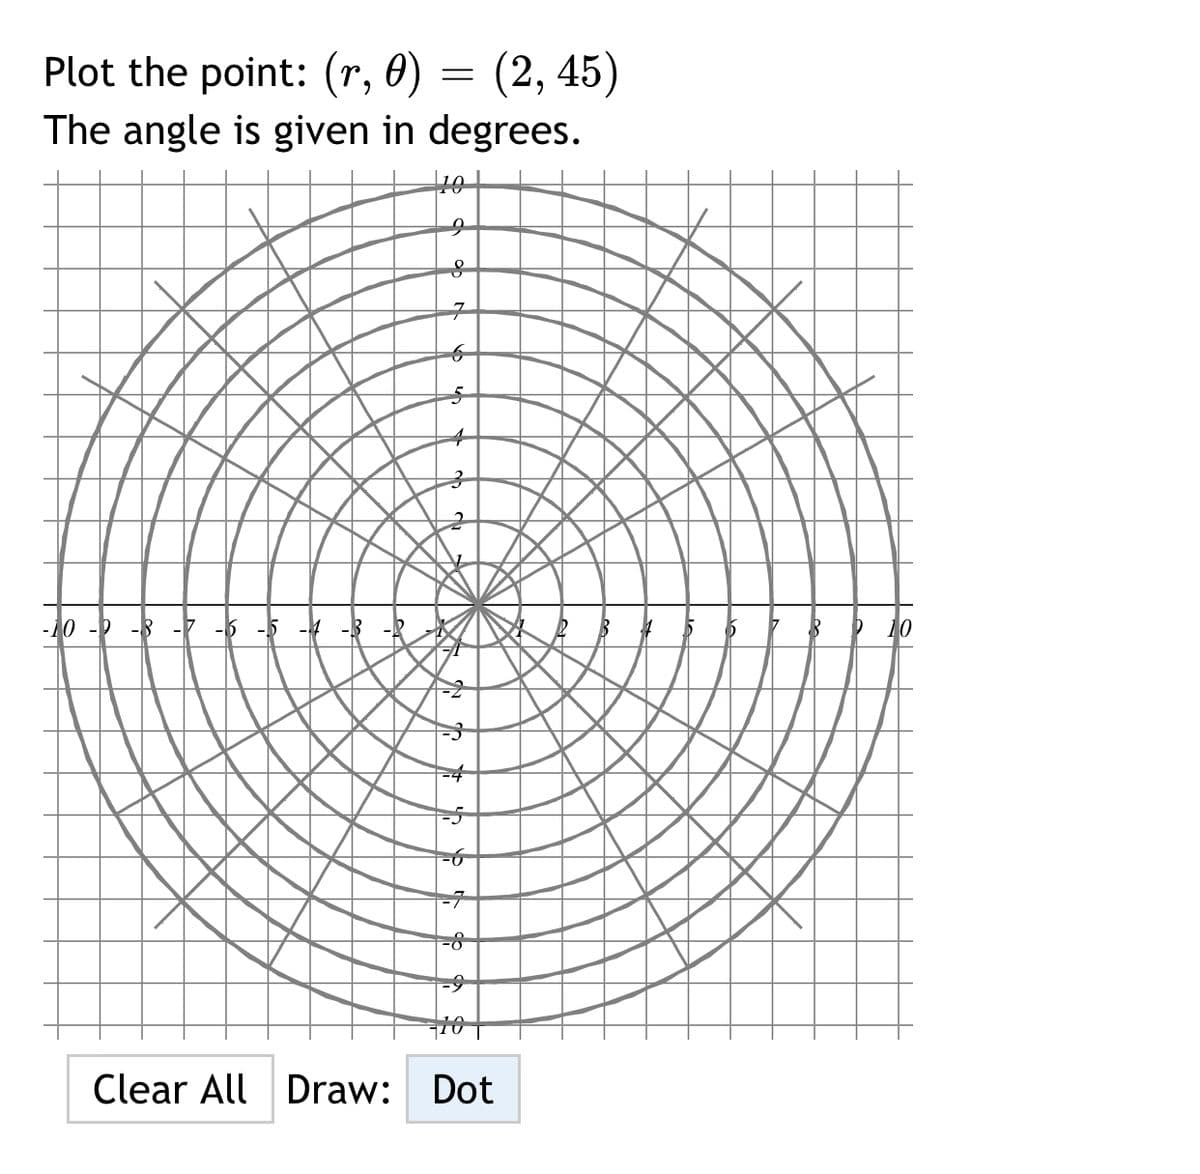 Plot the point: (r, 0)
The angle is given in degrees.
(2, 45)
-10 -Þ -8 -7 -5 -5 -4 -3
> 10
Clear All Draw: Dot
